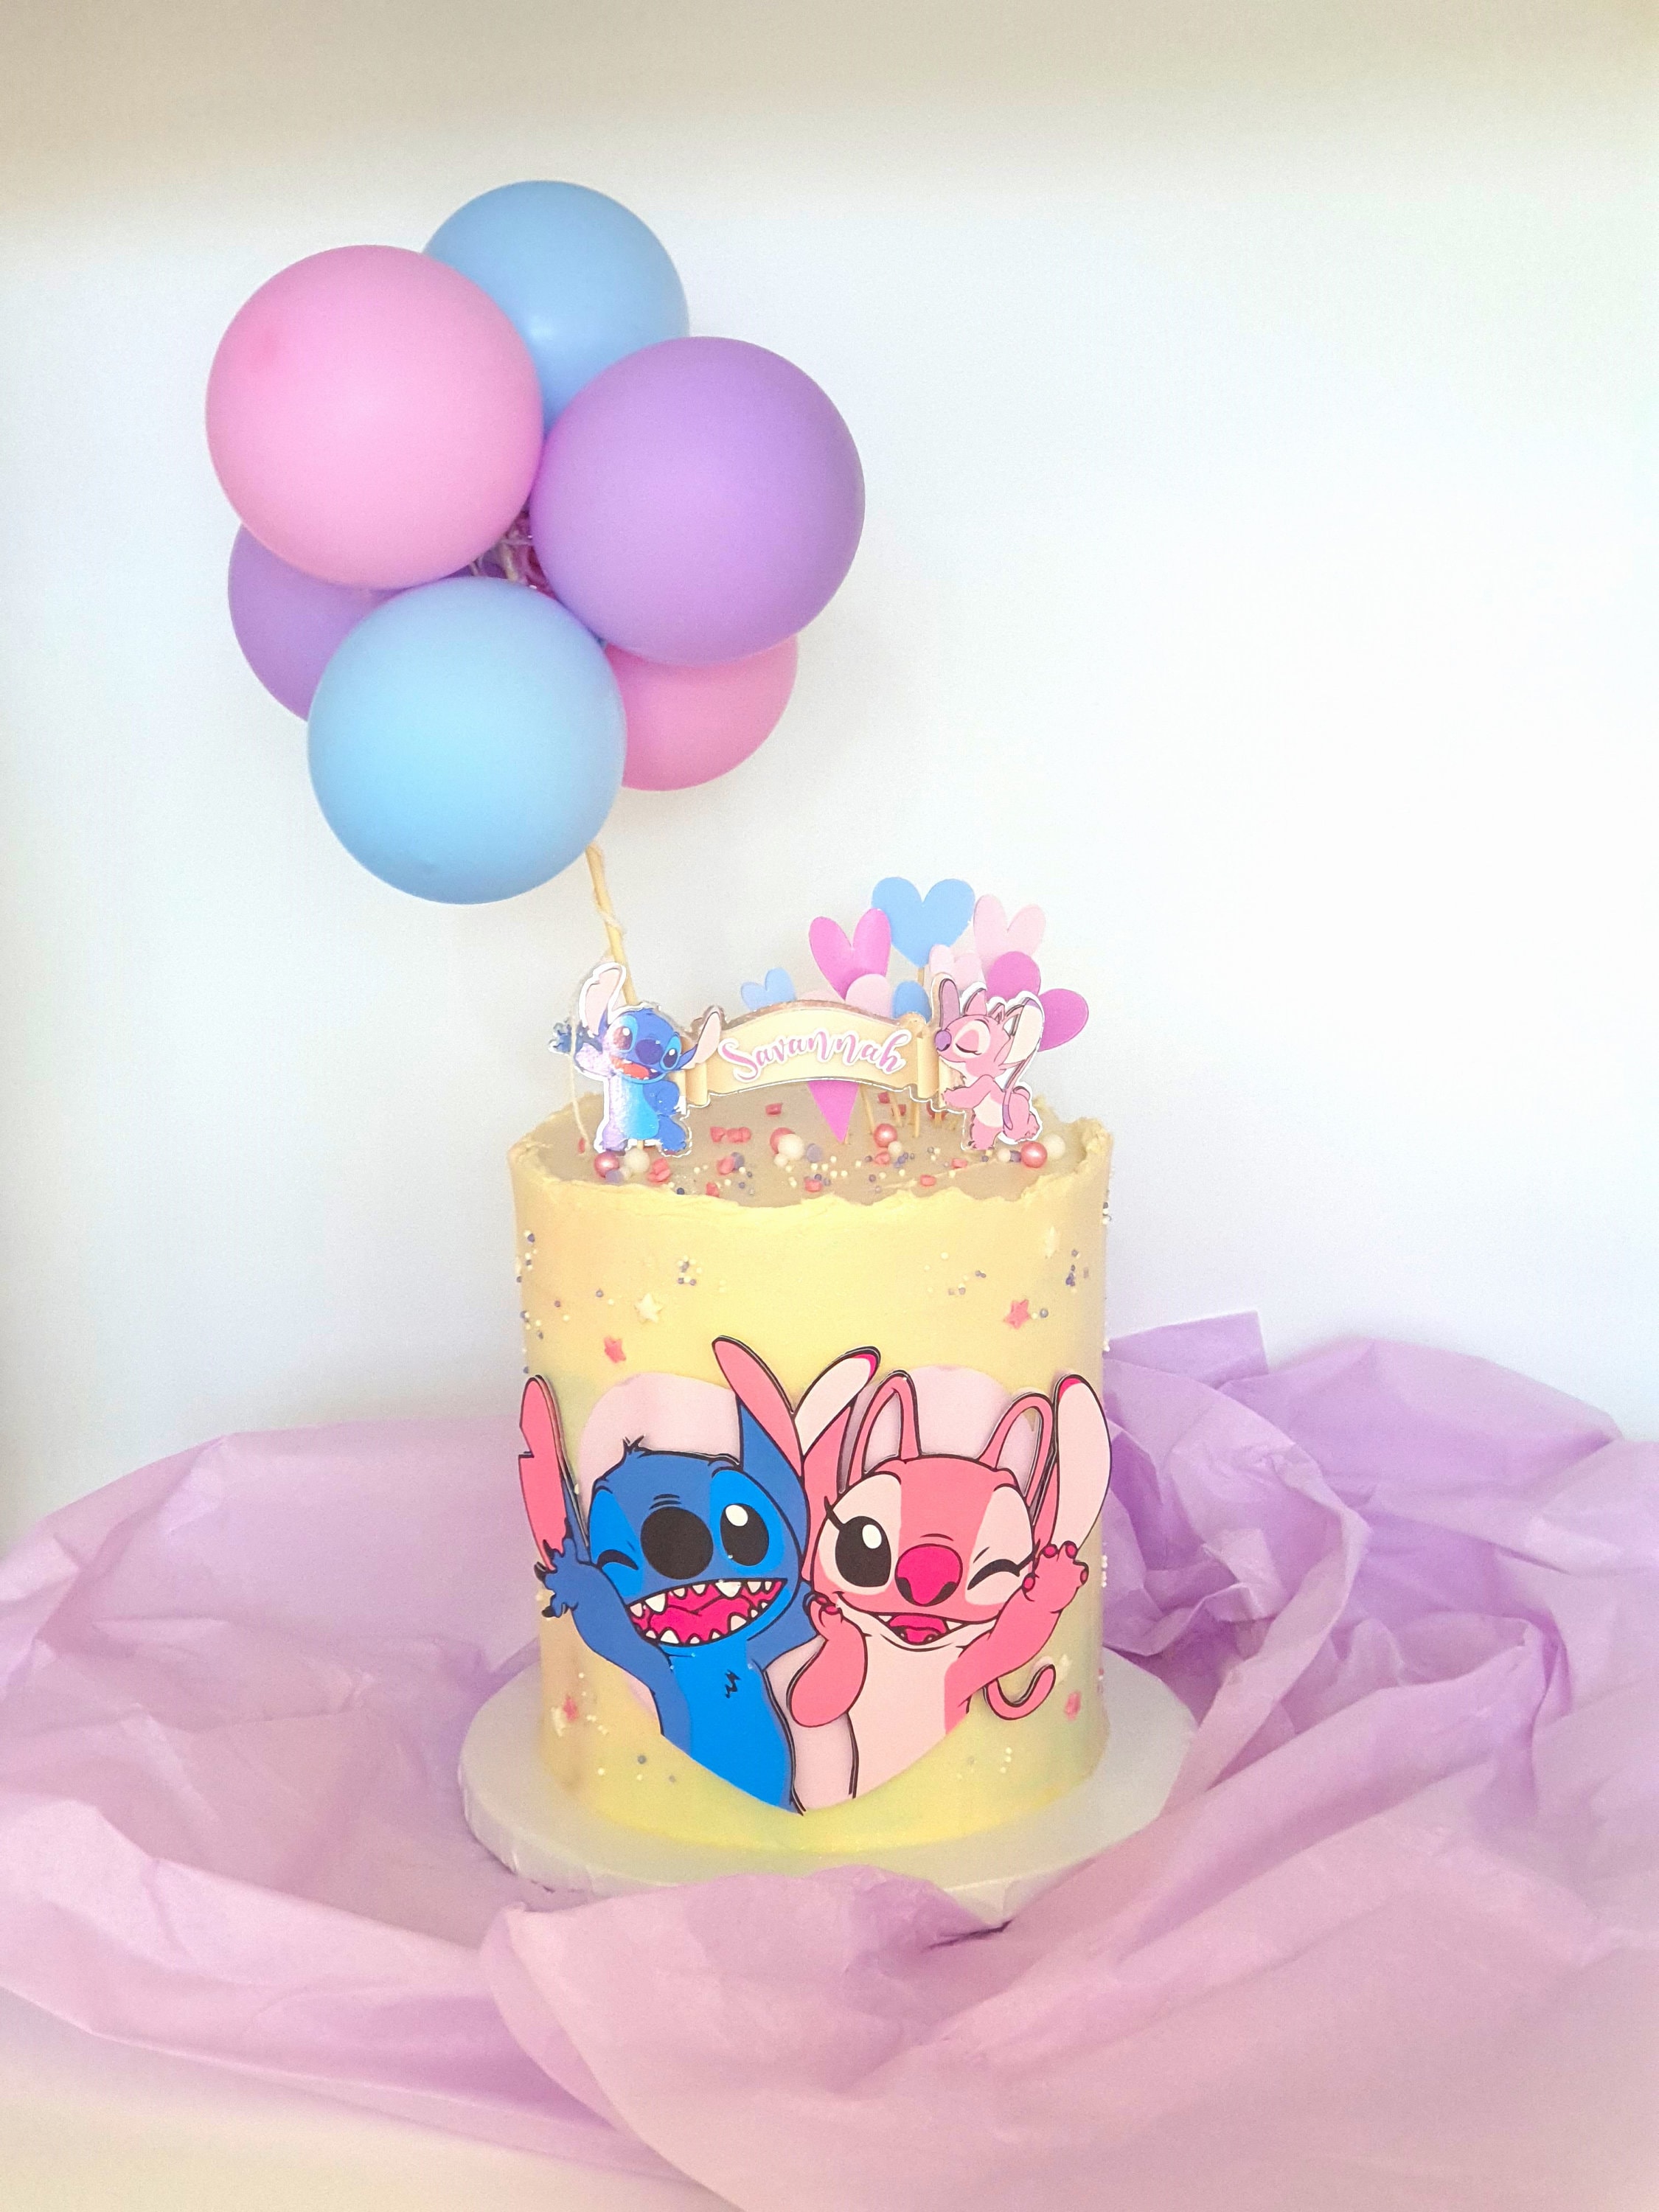 109PCS Disney Pink Lilo & Stitch Birthday Party Decorations Balloons  Children's Birthday Decoration Baby Shower Party Gift Supplies 